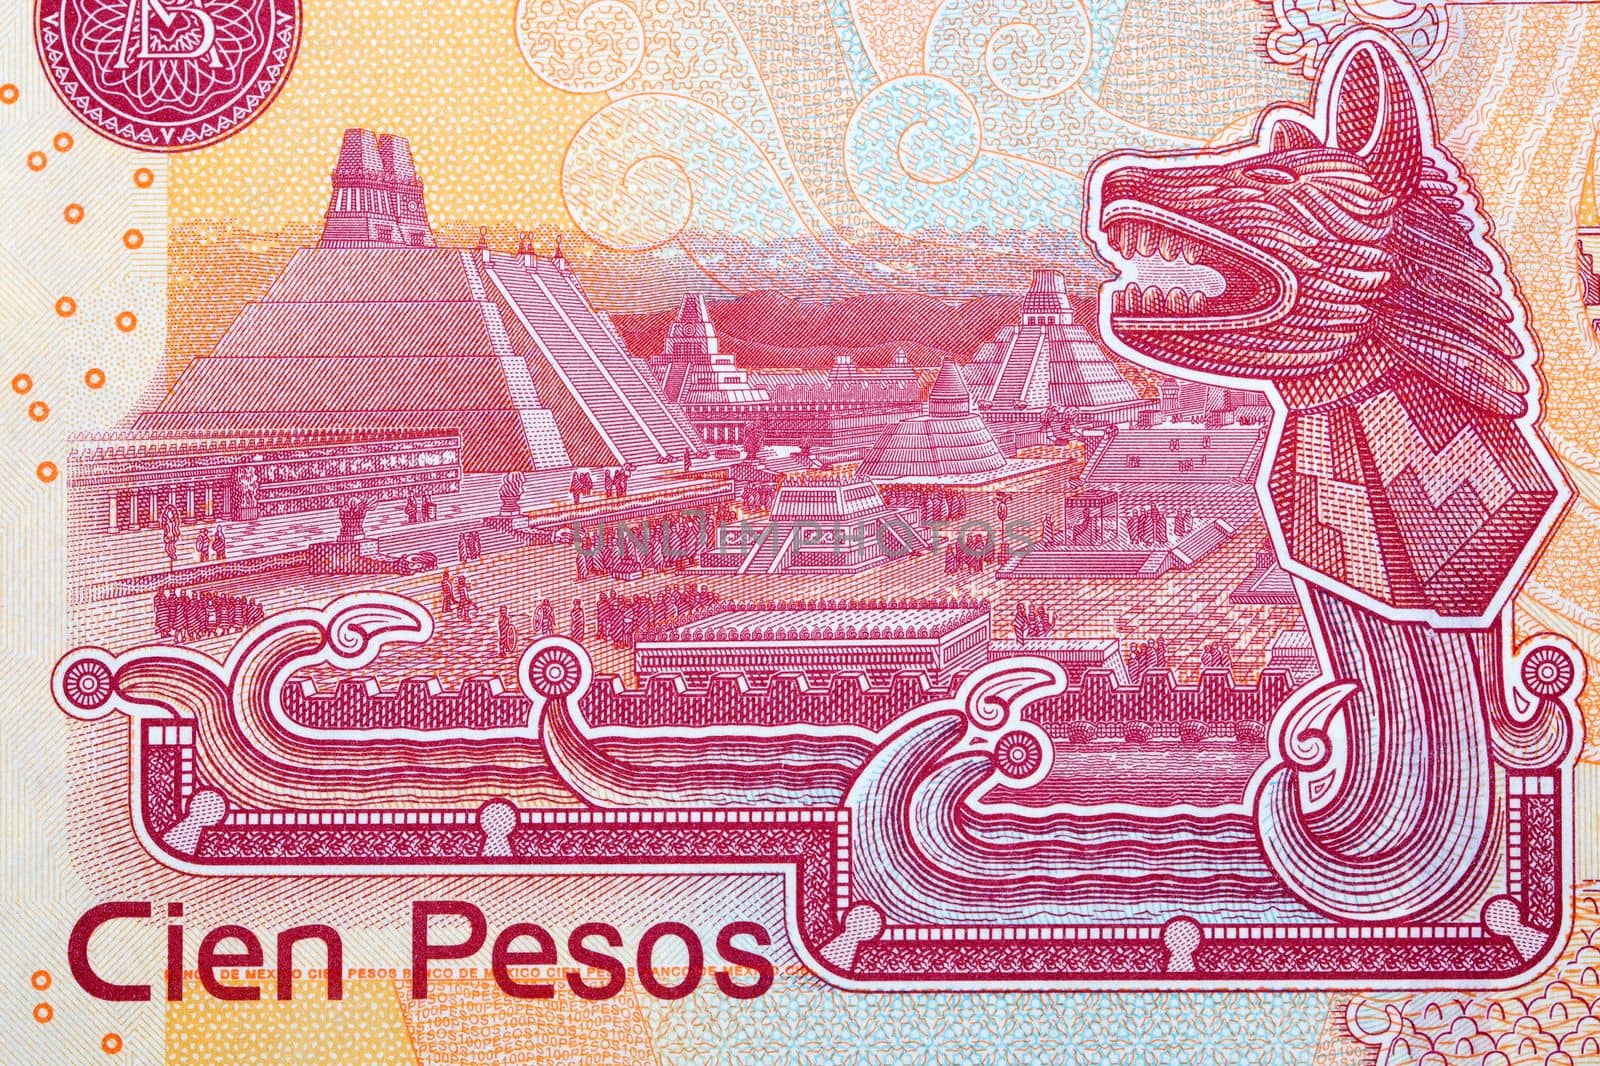 Temple and central square from Mexican money by johan10